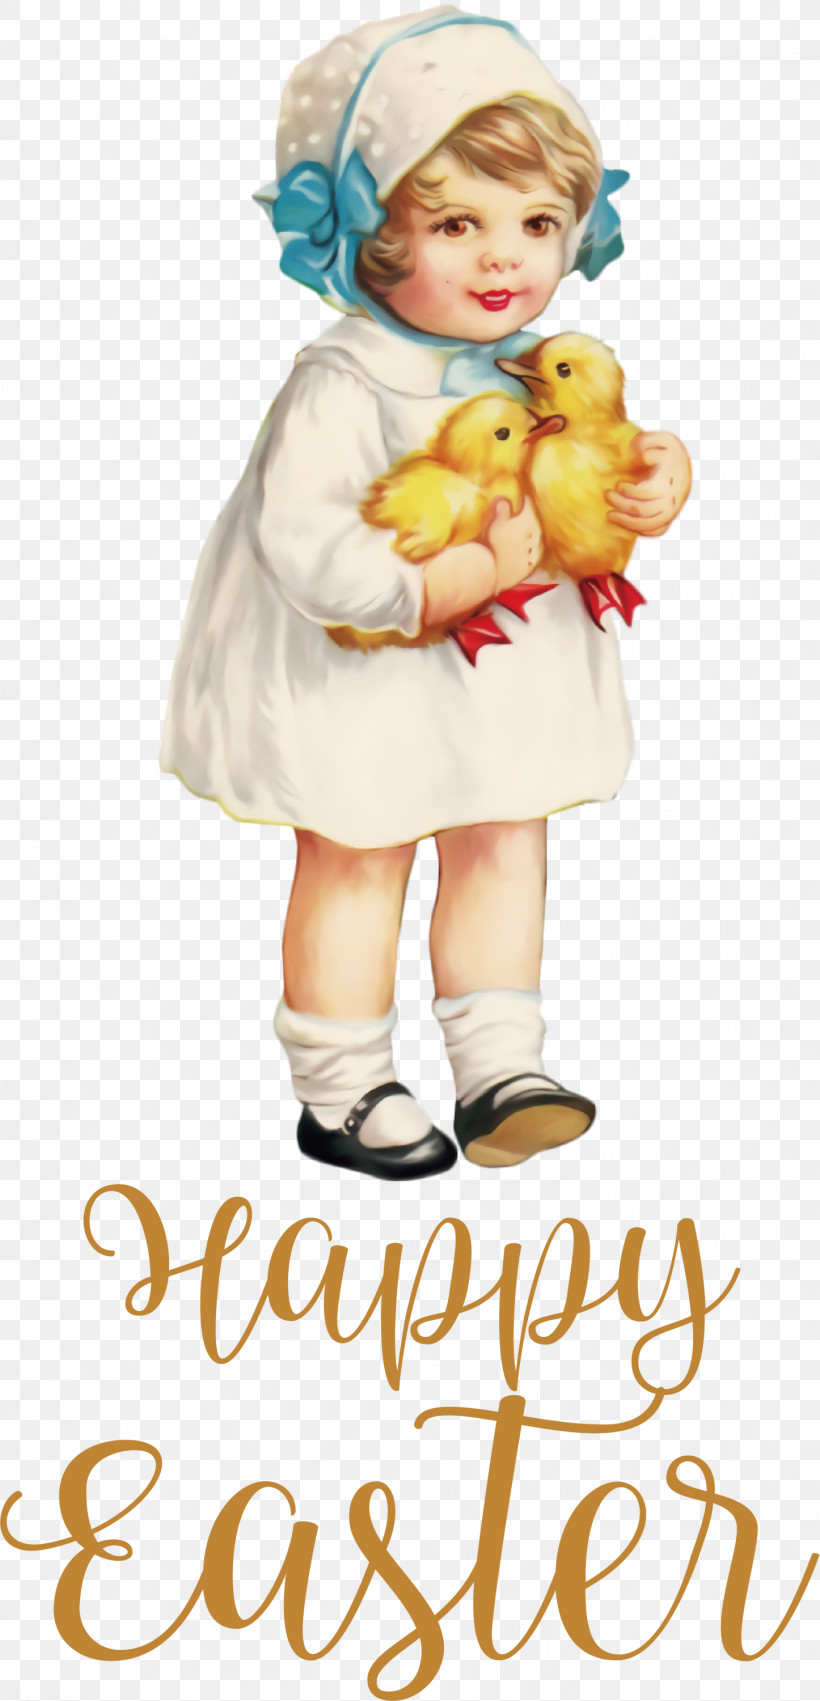 Happy Easter Chicken And Ducklings, PNG, 1446x3000px, Happy Easter, Chicken And Ducklings, Easter Basket, Easter Bunny, Easter Chicks Download Free